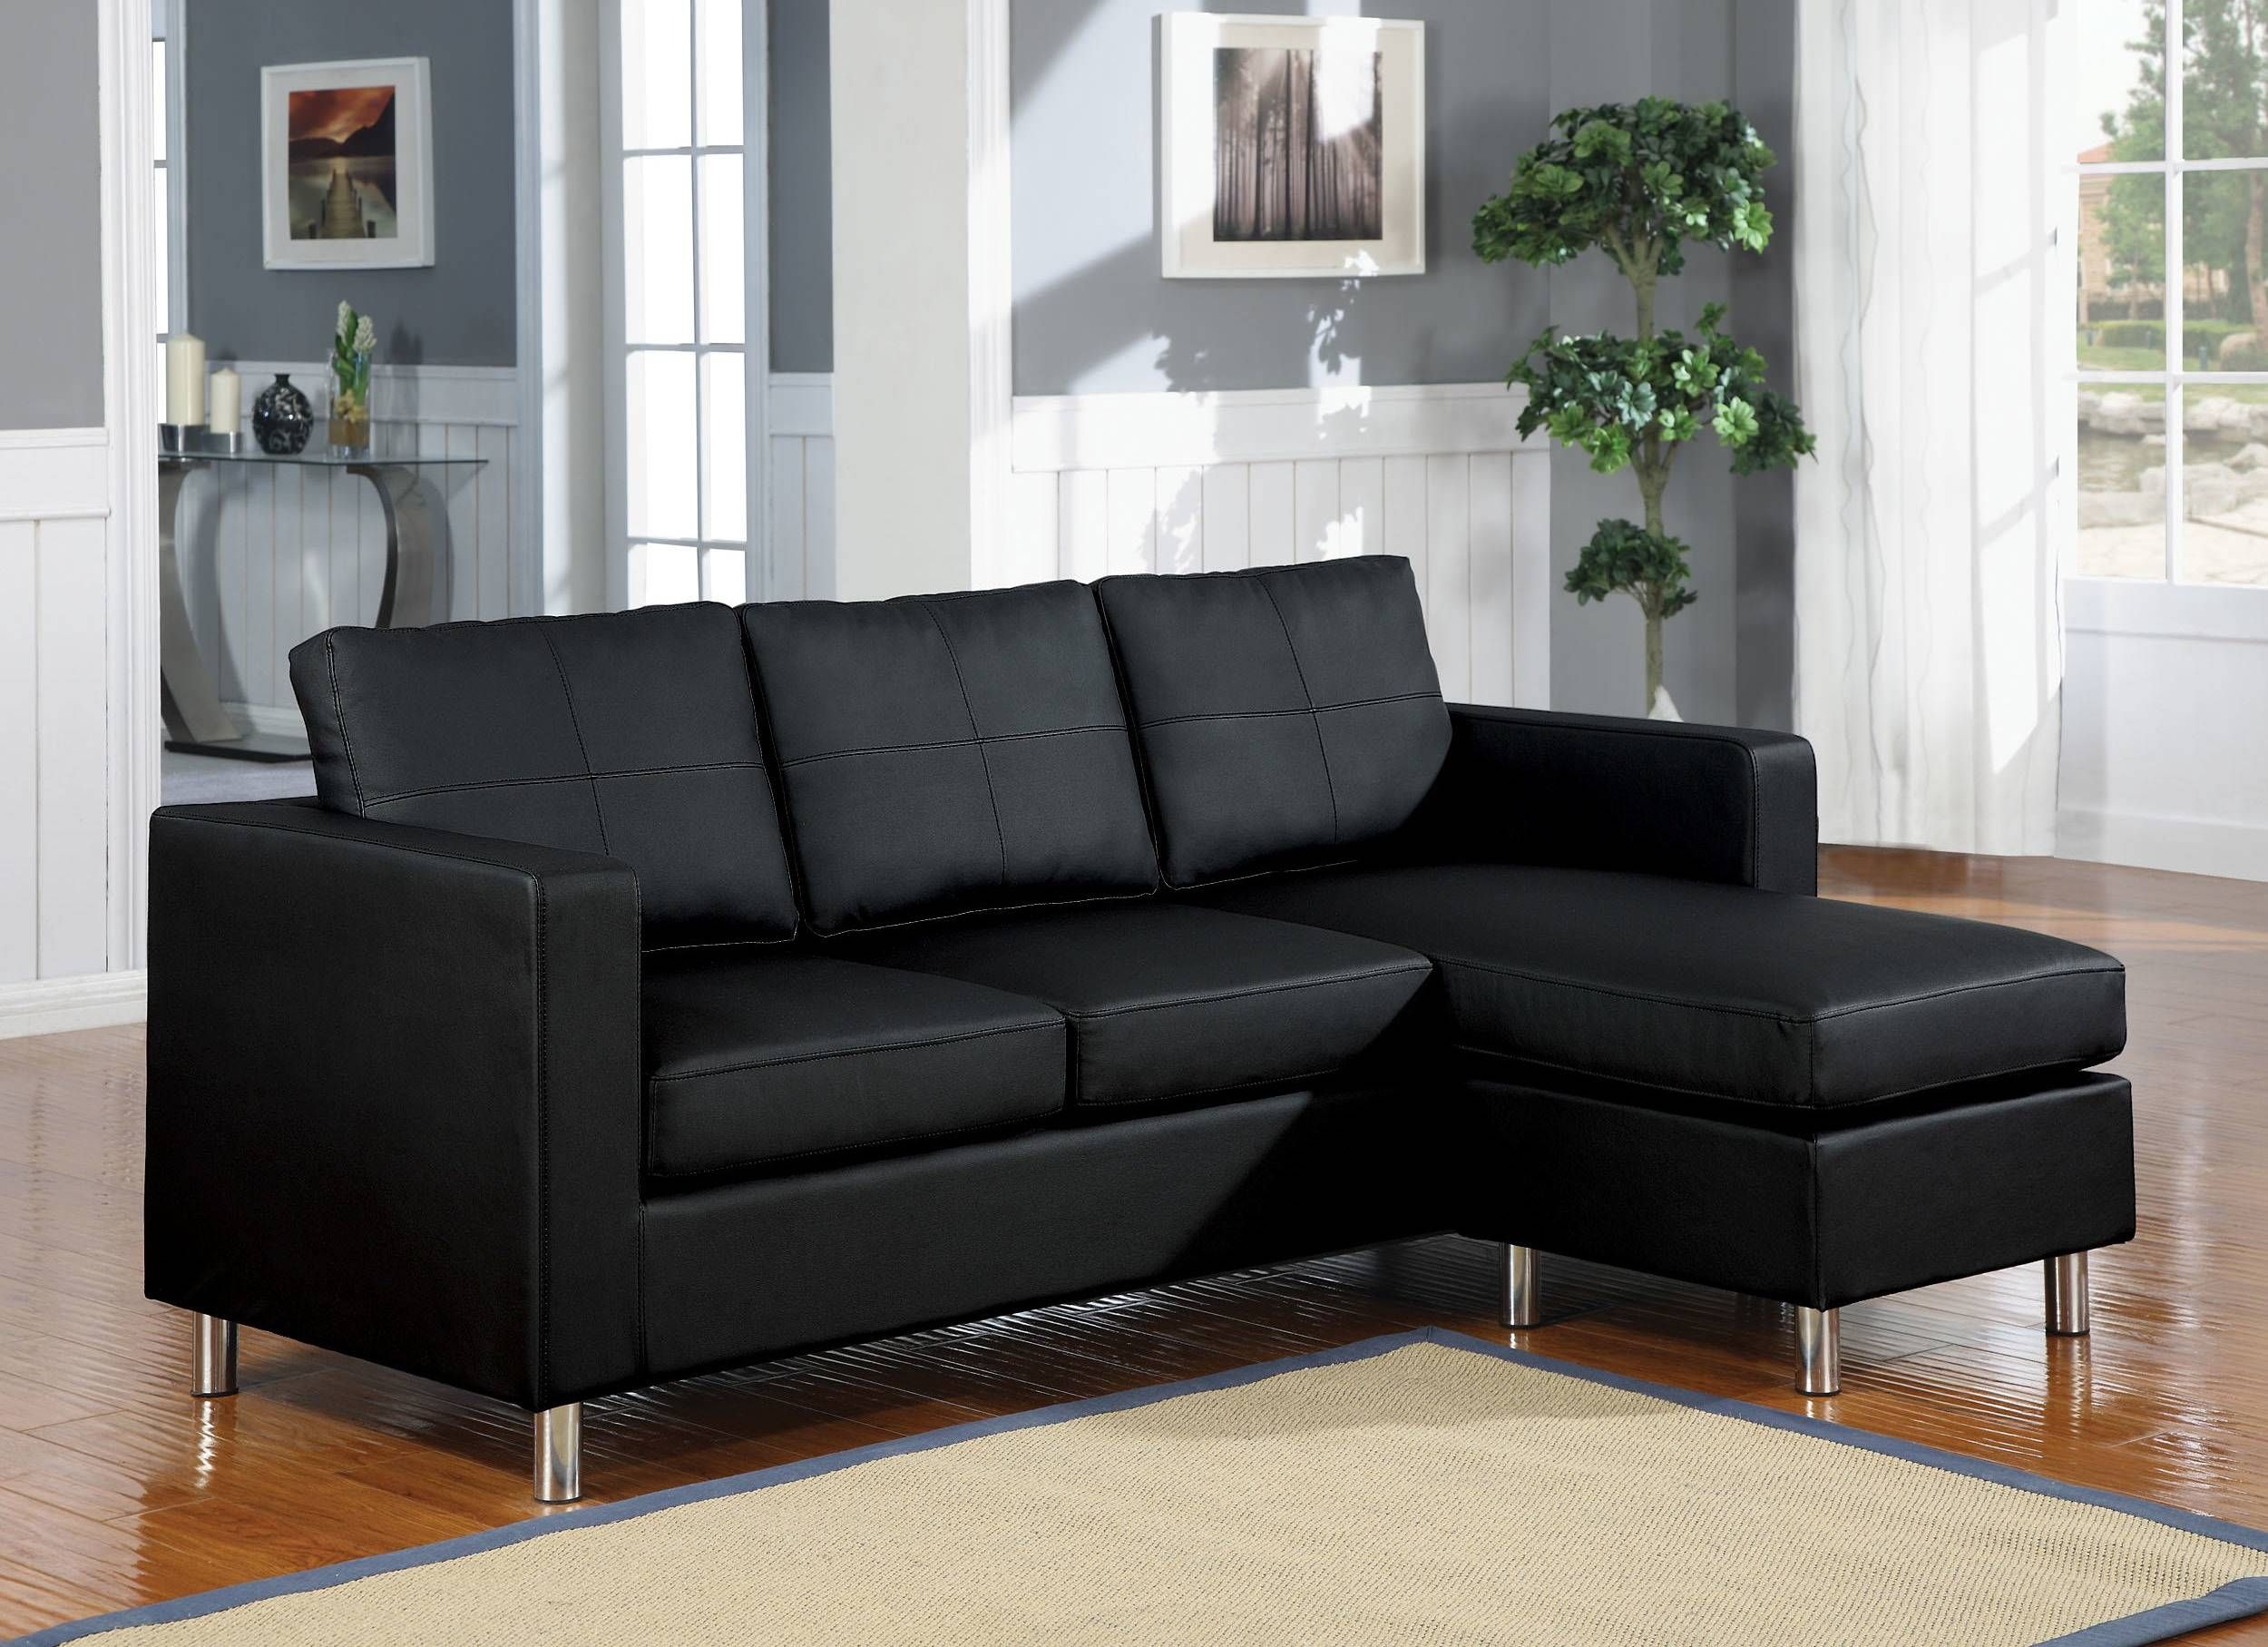 Furniture & Sofa: Perfect Small Spaces Configurable Sectional Sofa With Regard To Small Sofas With Chaise Lounge (View 6 of 15)